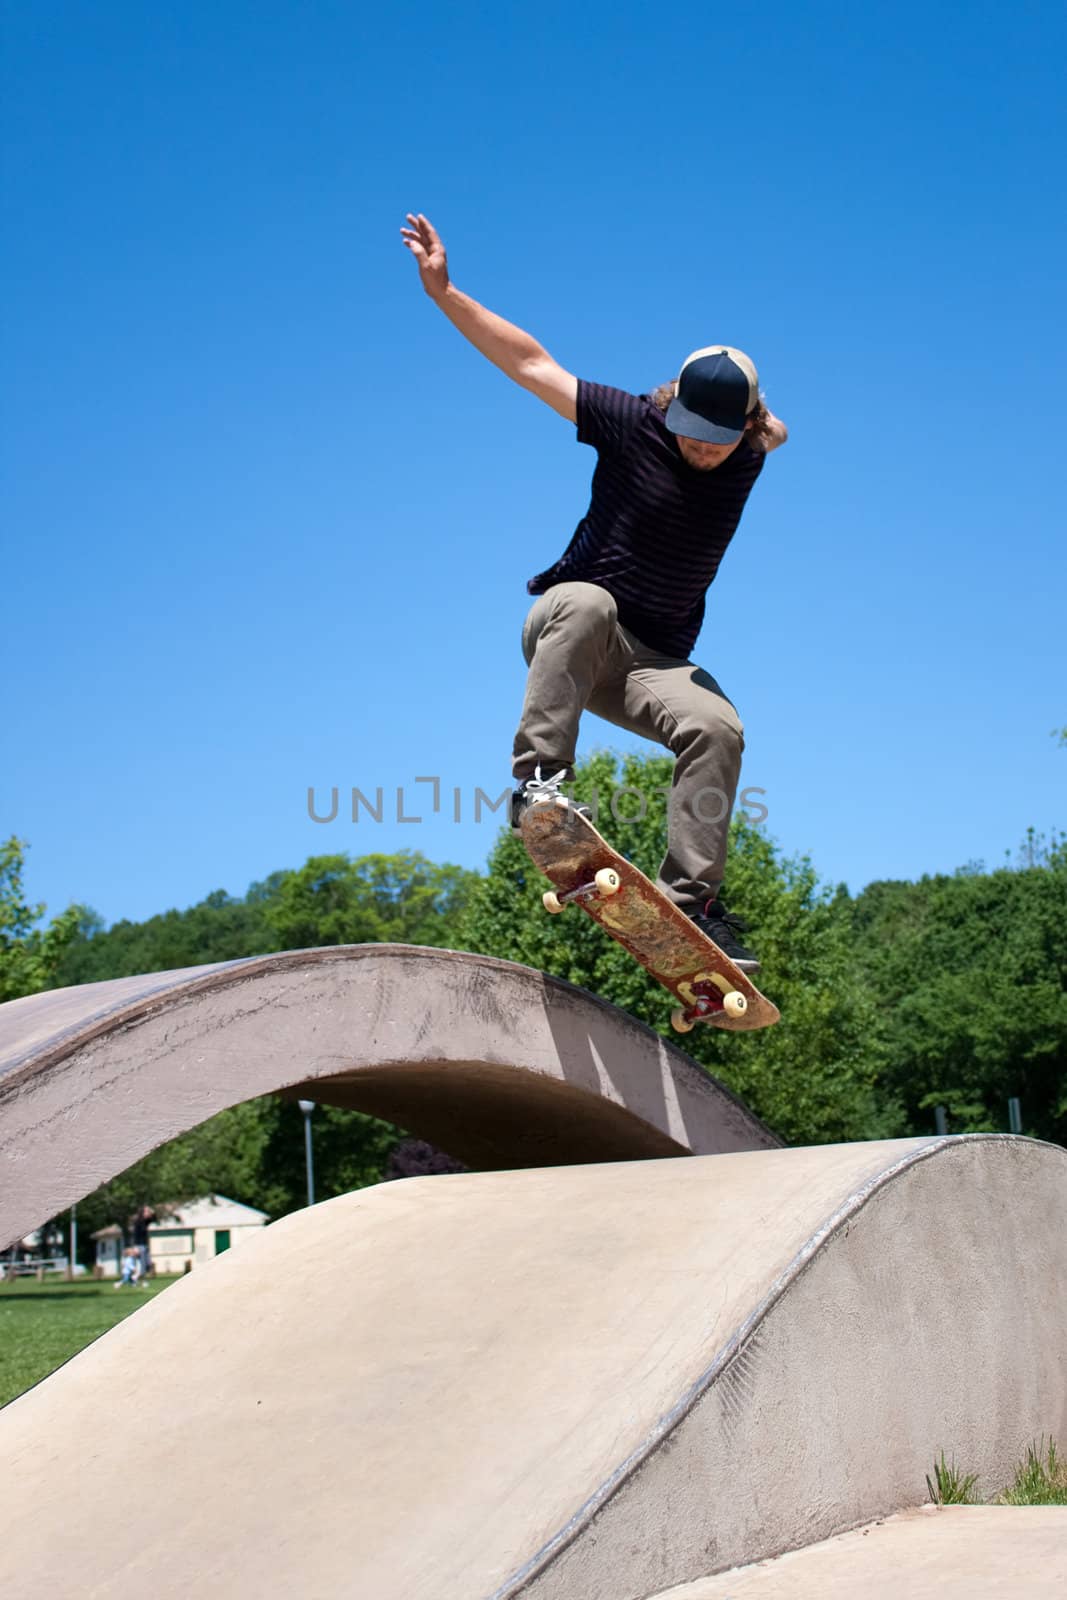 Skateboarder Doing a Jump at a Concrete Skate Park by graficallyminded